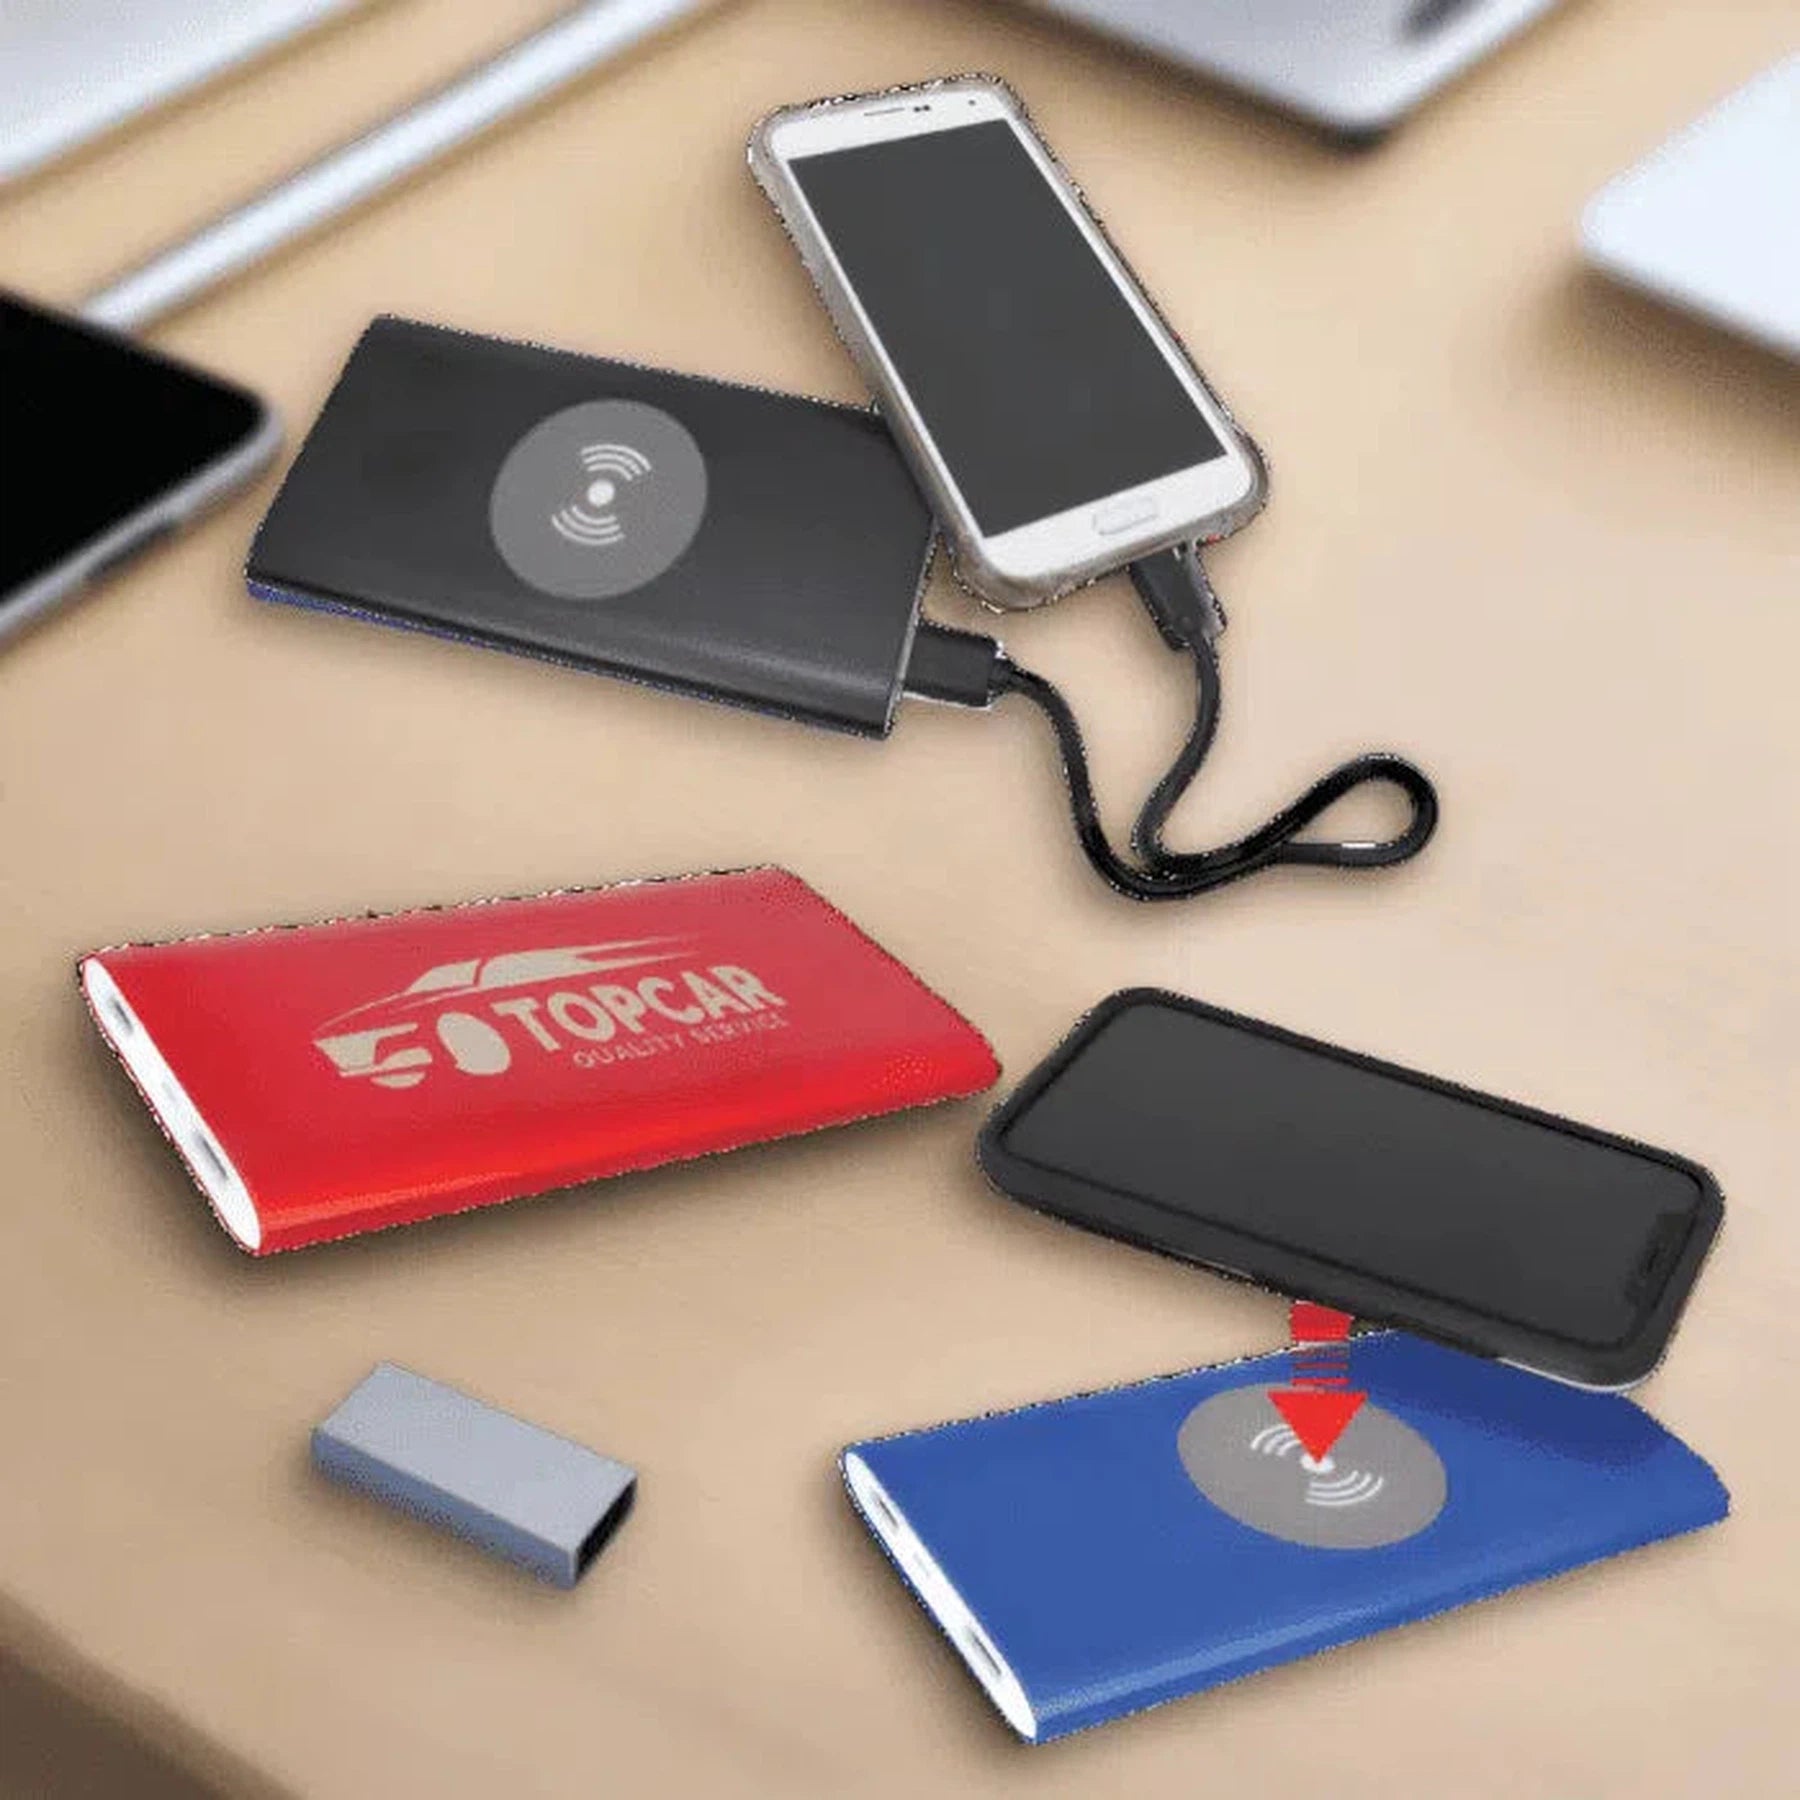 8000MAH Power Bank & Wireless Anodized Aluminum Charger w/USB Power Cord